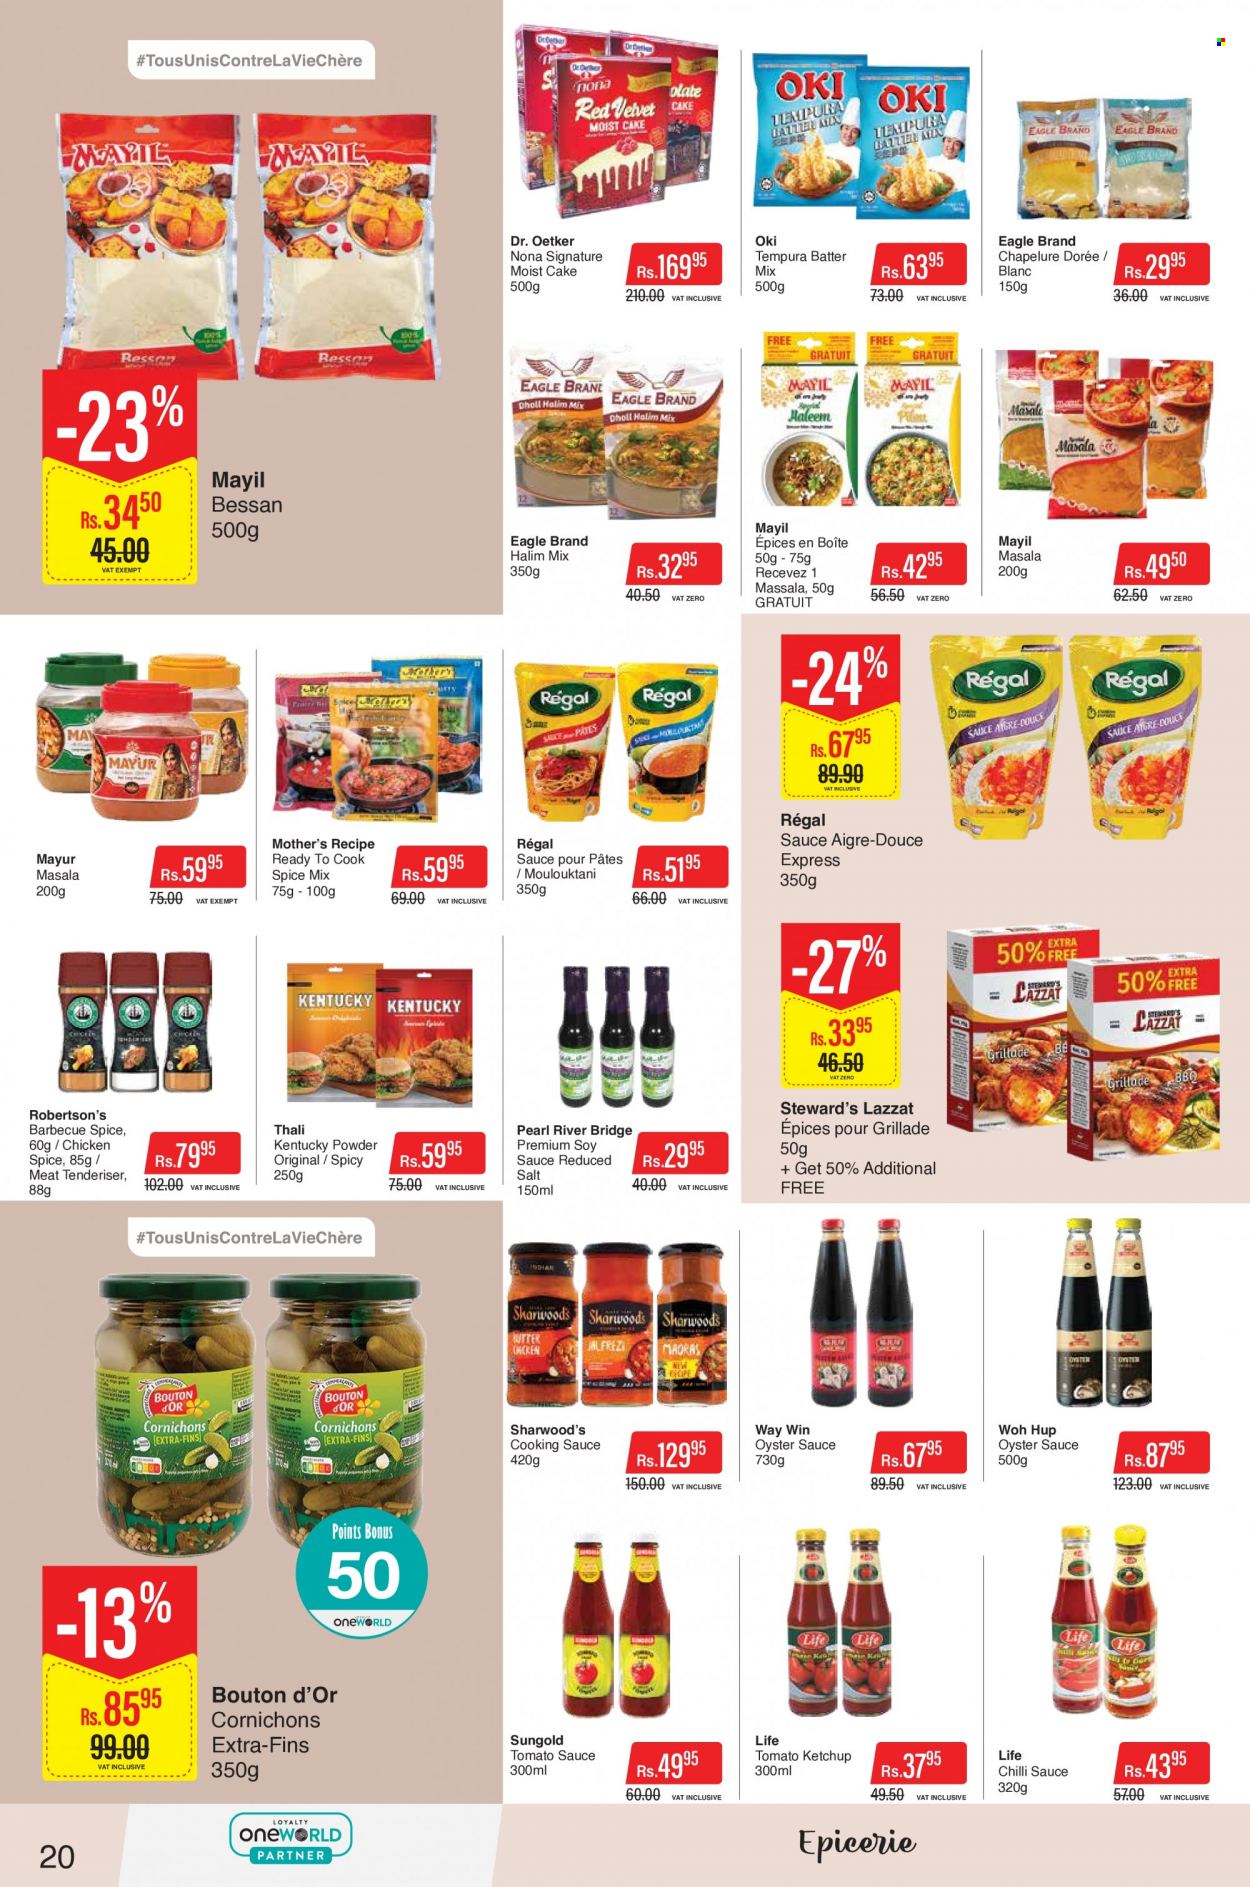 thumbnail - Intermart Catalogue - 23.11.2022 - 20.12.2022 - Sales products - cake, oysters, sauce, Dr. Oetker, salt, tomato sauce, spice, soy sauce, oyster sauce, chilli sauce, ketchup. Page 20.